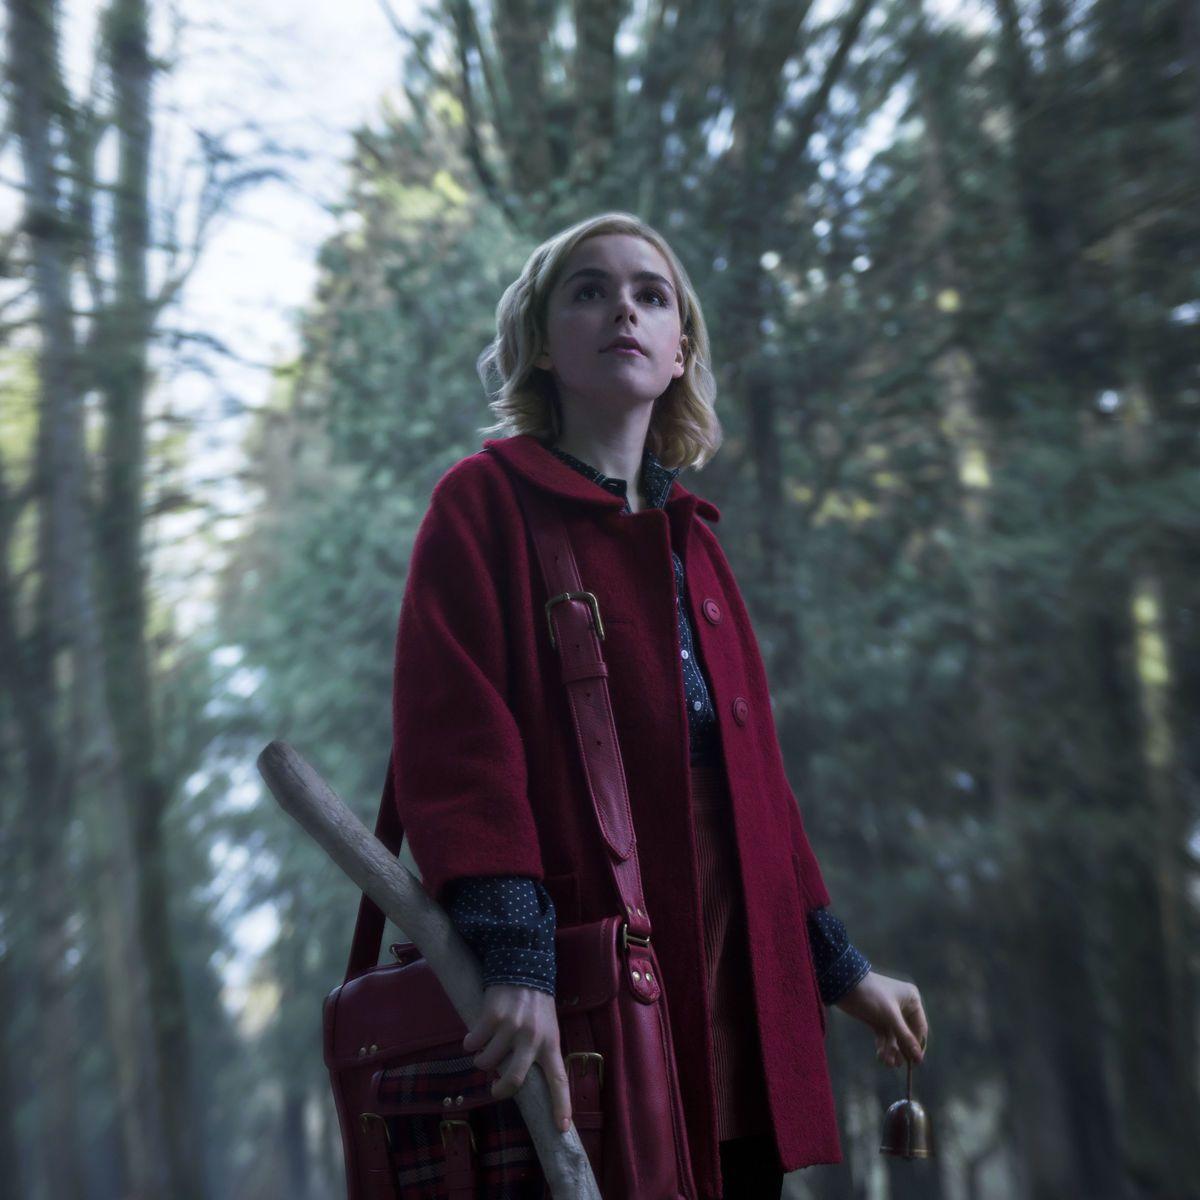 Kiernan Shipka gets magical in first image from Netflix's Chilling